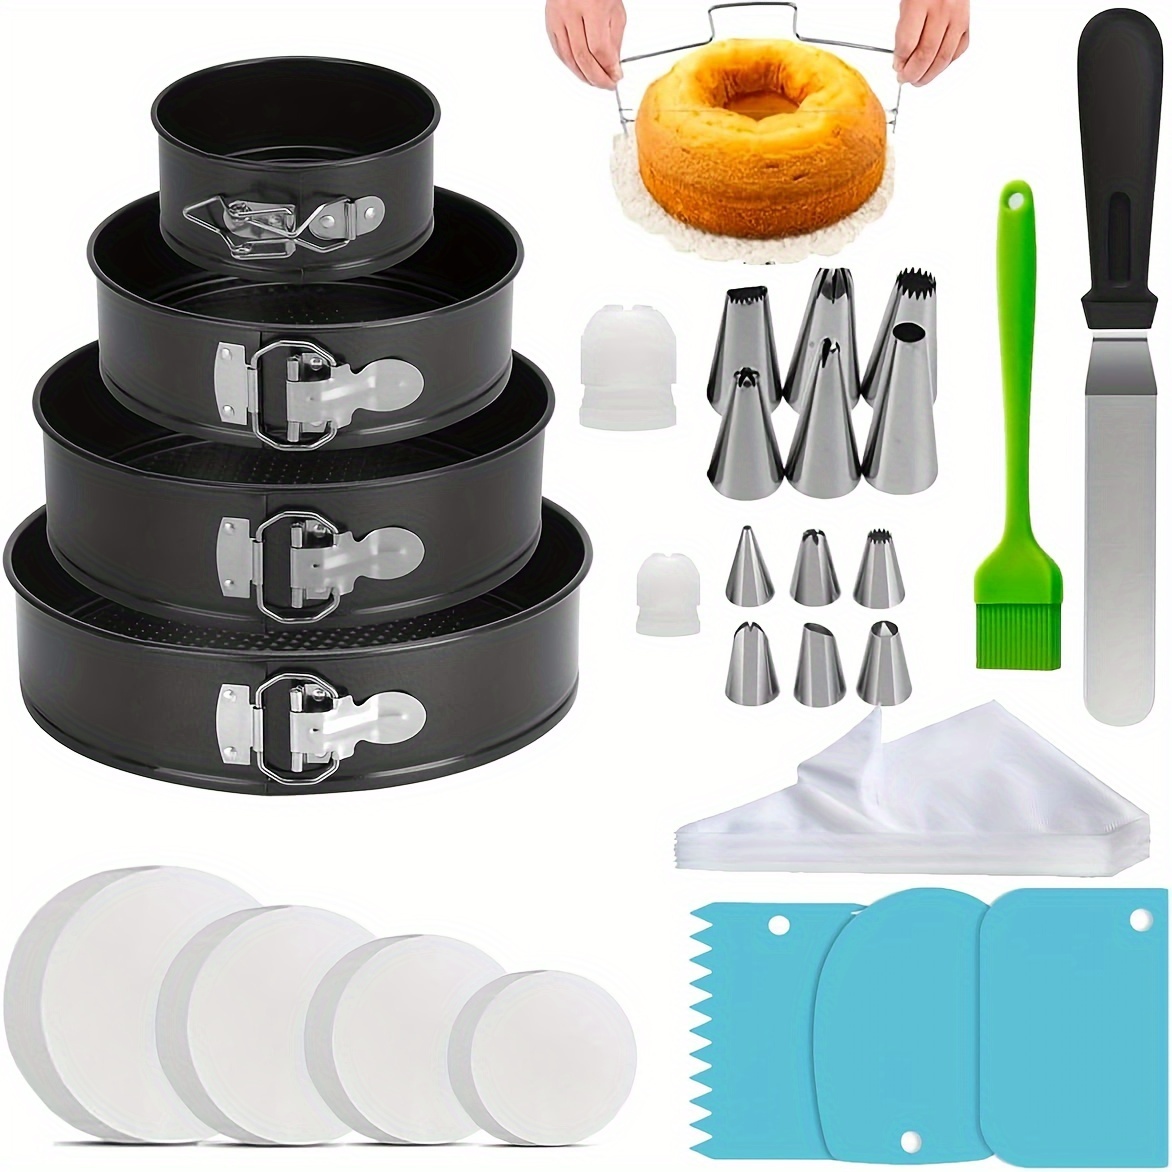 

Circular Cake Plate Set For Baking Cake Decorations: 4 Non Stick Spring Buckle Mold Sets (4, 7, 9, 10 Inches), Frosting Tips, Cake Flattener - Multifunctional Leak Proof Cheese Cake Plate